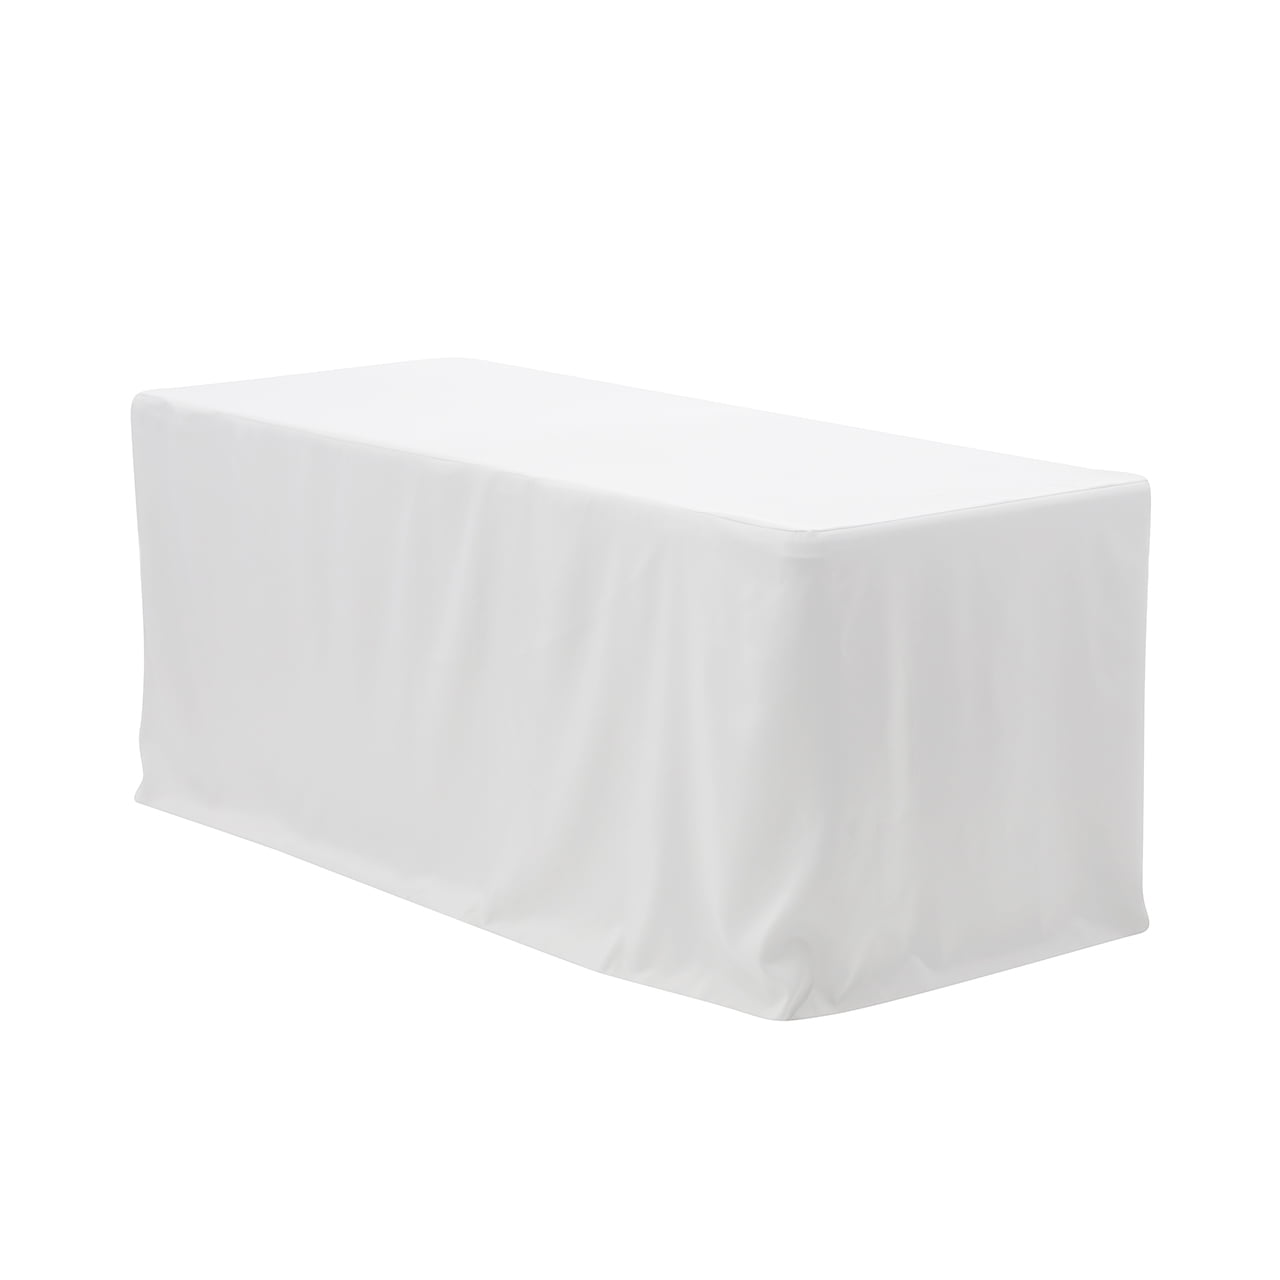 5x 90"x132" Inch White Rectangular 6ft Trestle Table Tablecloths Exhibition 